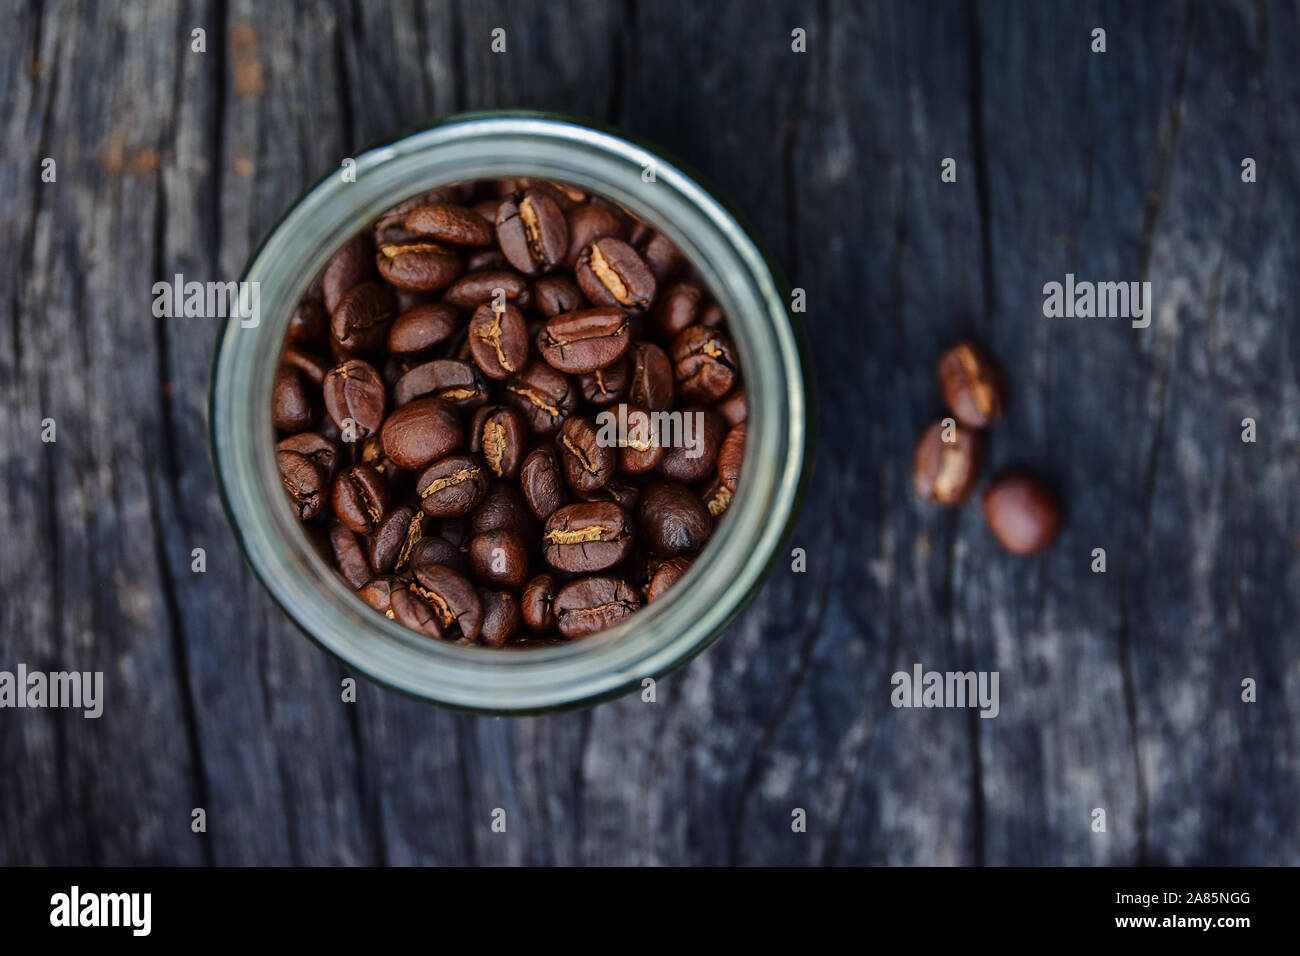 roasted coffee beans in glass containers on old wood table background, overhead view with copy space Stock Photo